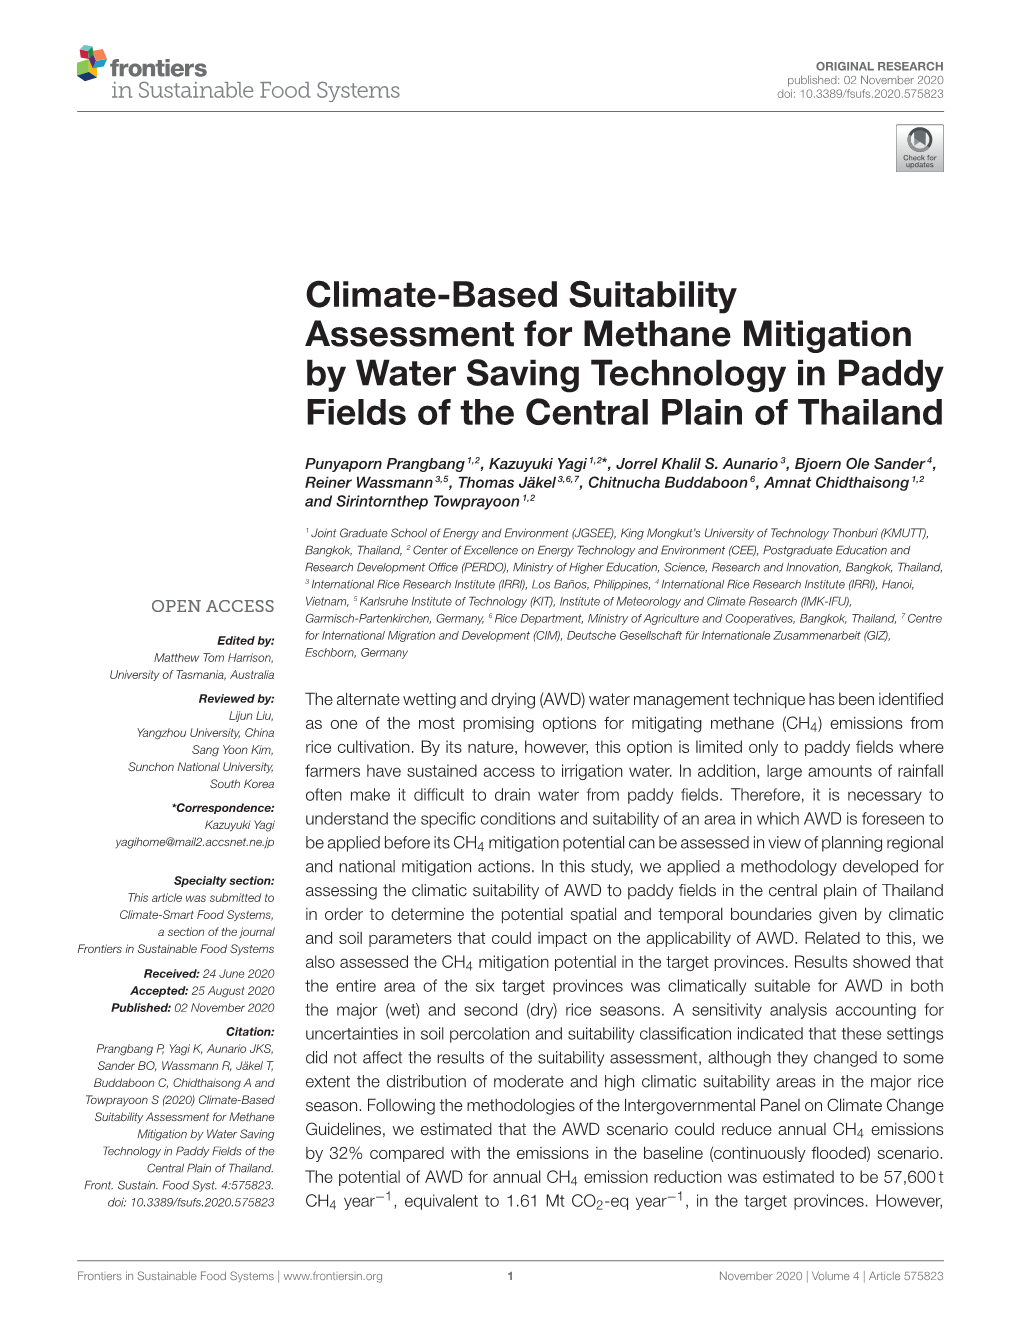 Climate-Based Suitability Assessment for Methane Mitigation by Water Saving Technology in Paddy Fields of the Central Plain of Thailand